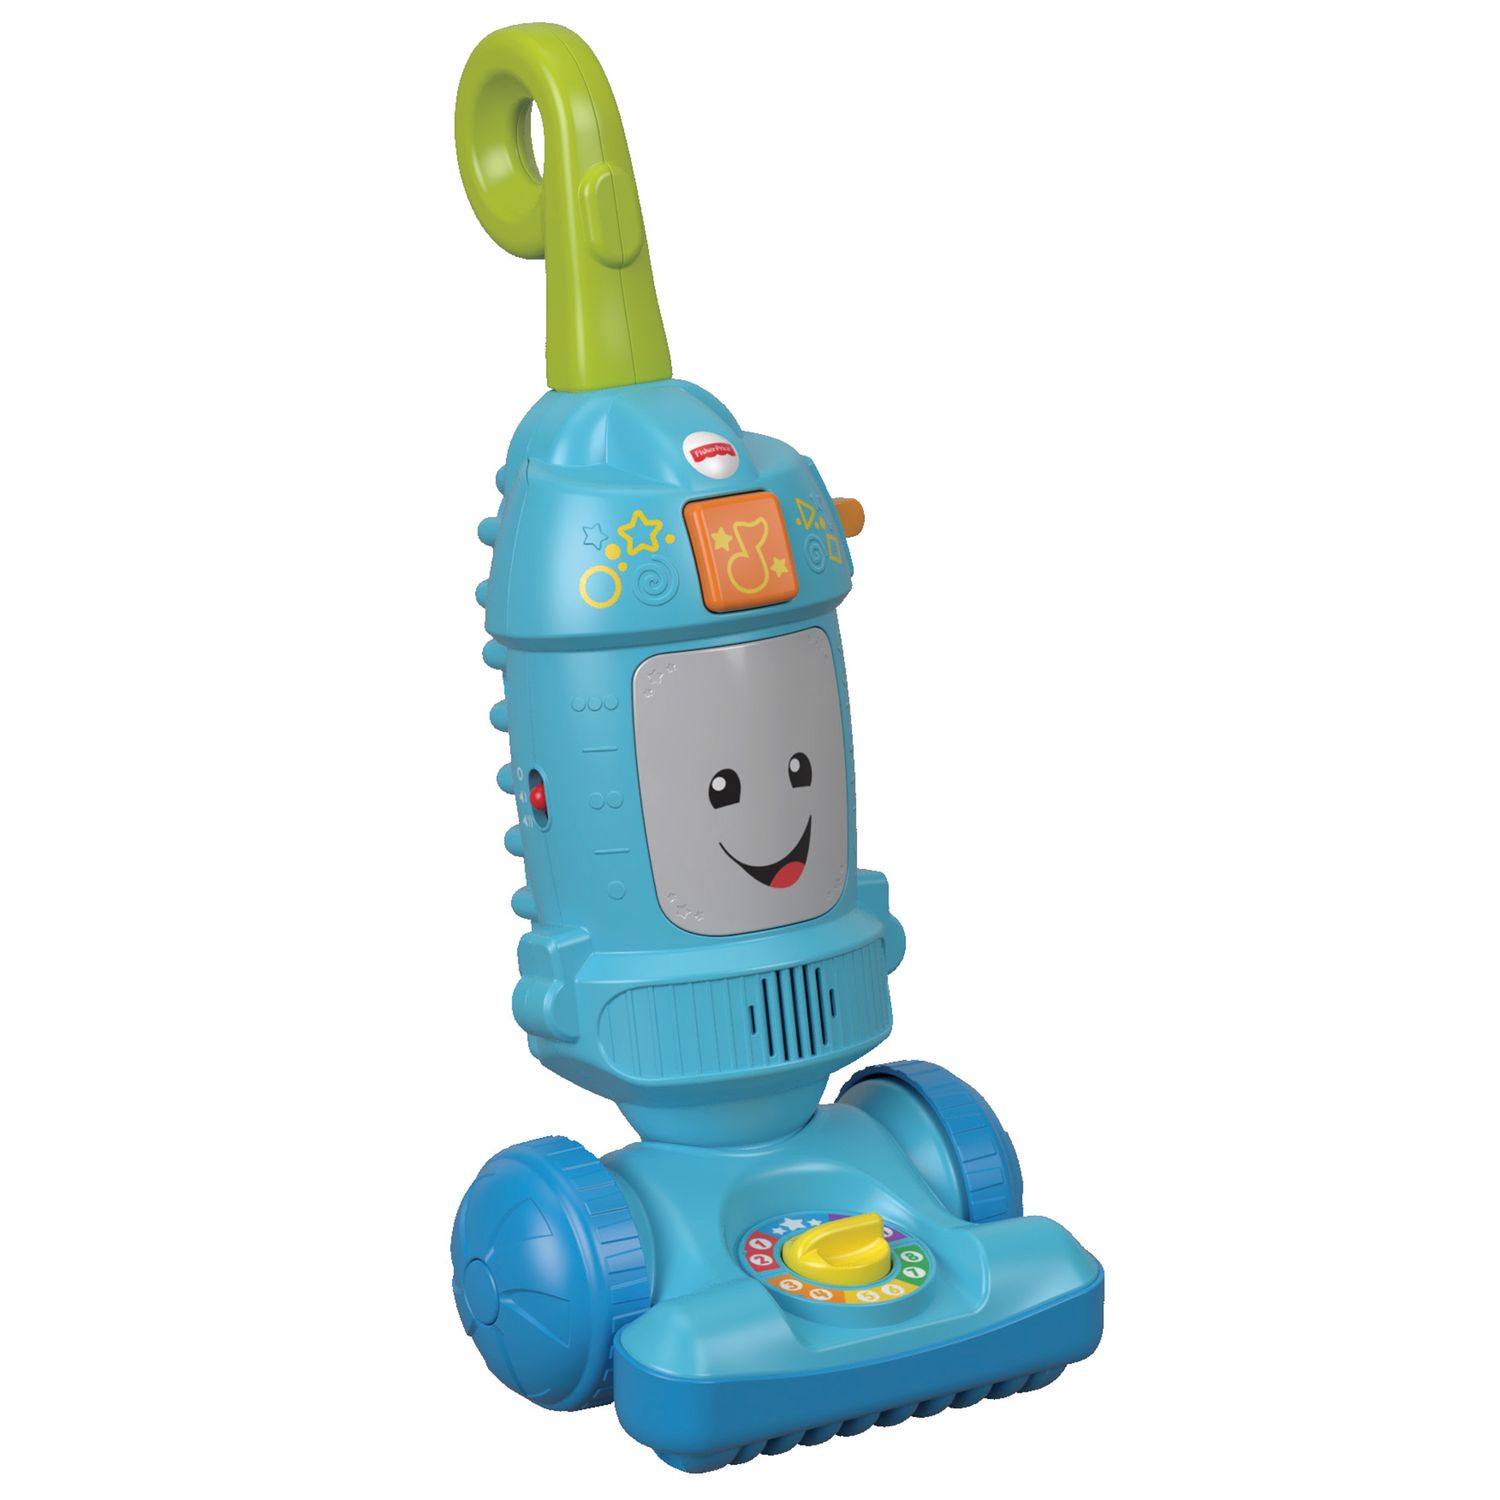 fisher price infant toys